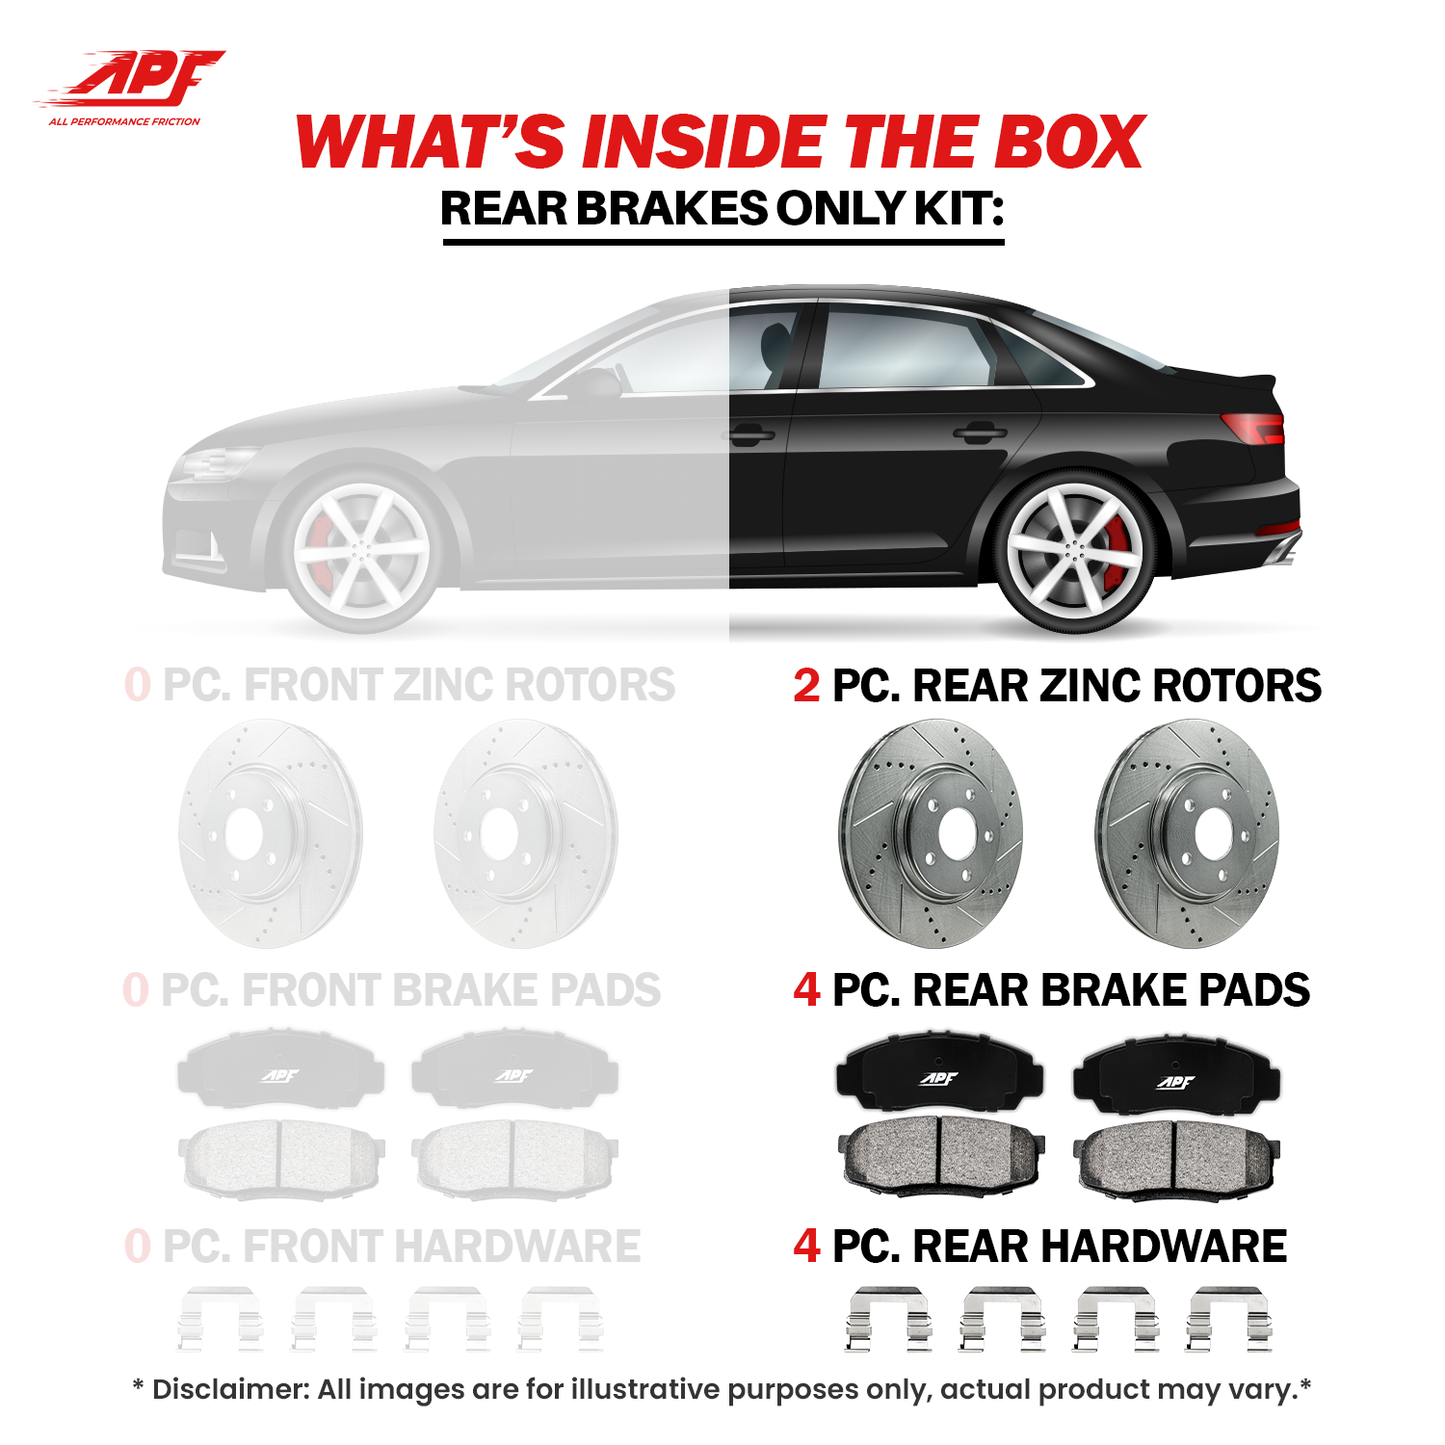 APF All Performance Friction Rear Rotors and Pads Half Kit compatible with Saab 9-7x 2005-2009 Zinc Drilled Slotted Rotors with Ceramic Carbon Fiber Brake Pads | $284.8